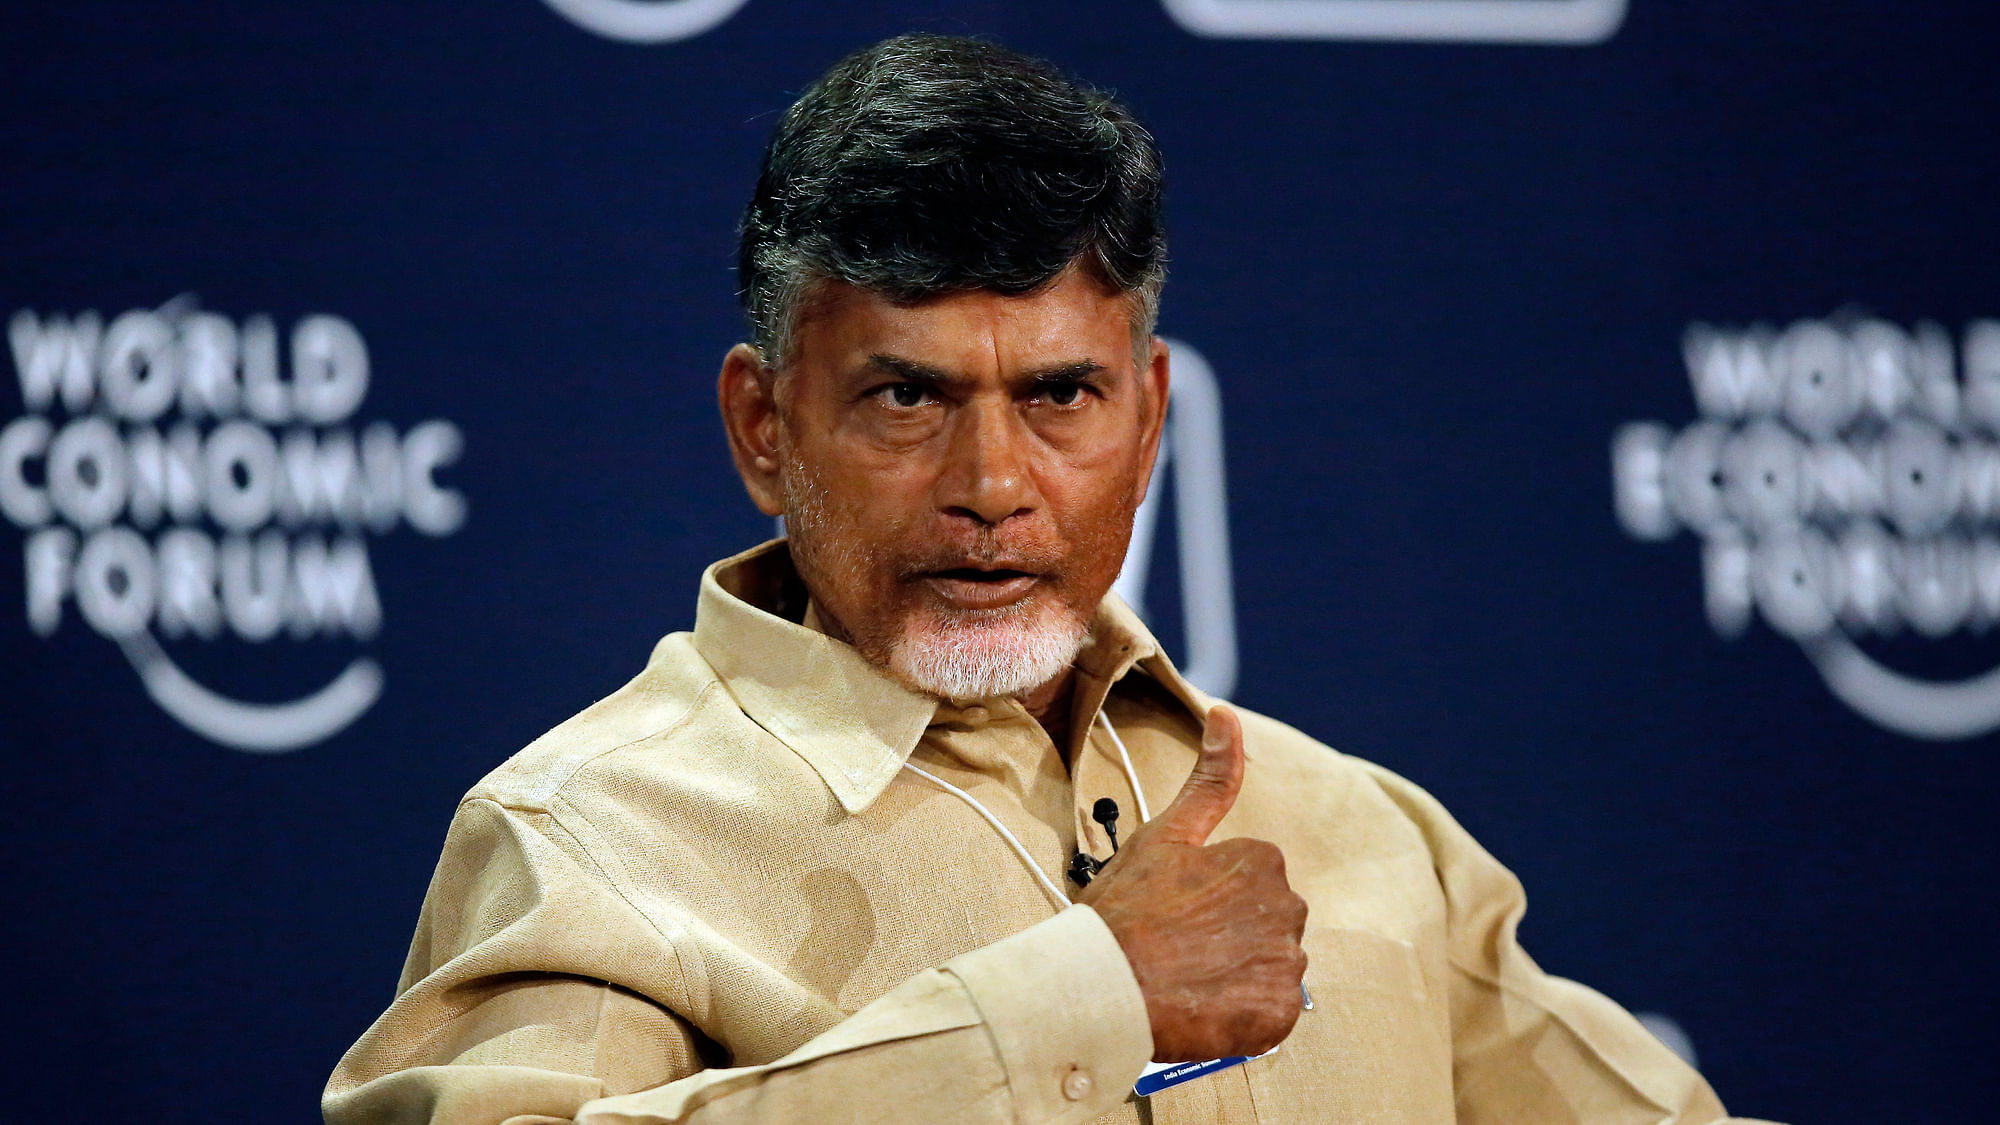 34-year-old Lokesh, the only son of Naidu, was elected to the state legislative council in March. File photo of N Chandrababu Naidu, Chief Minister, Andhra Pradesh. (Photo: Reuters)